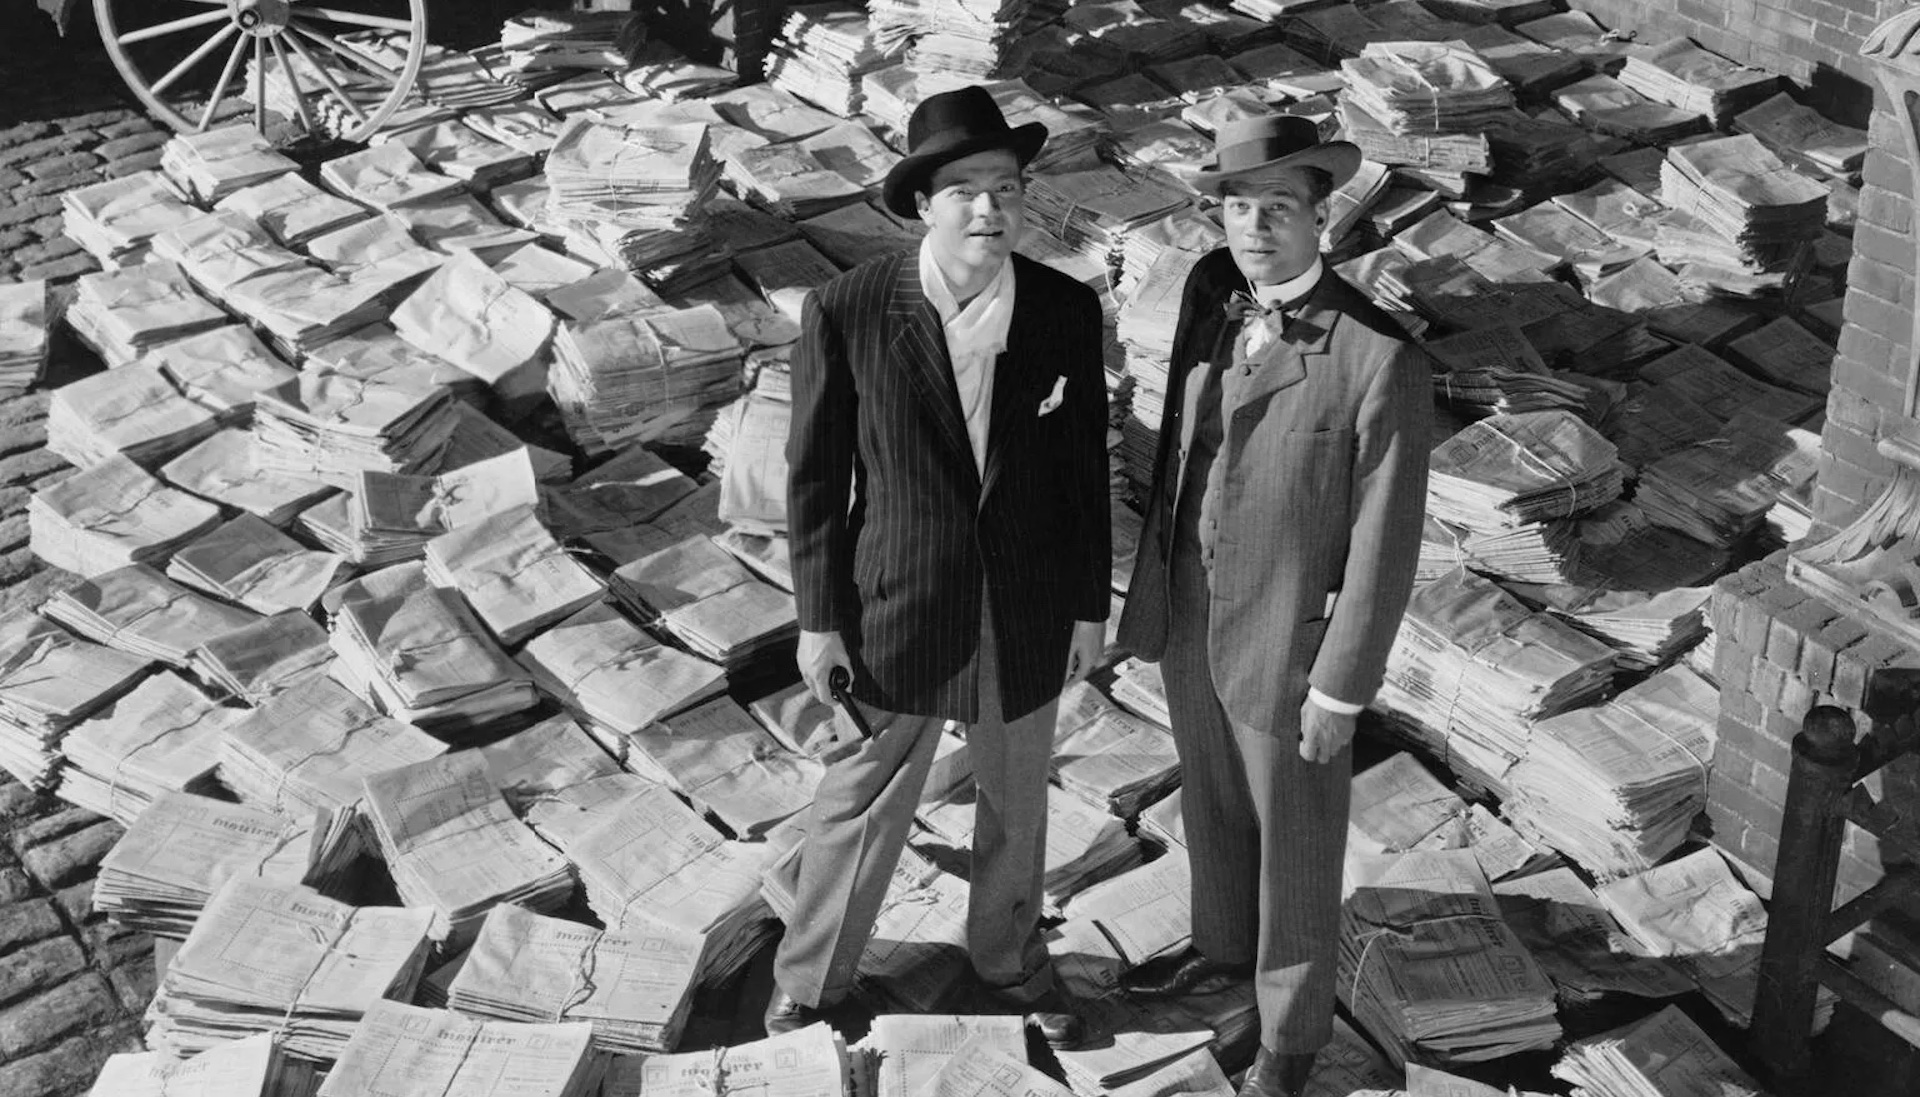 Two men standing on top of piles of newspaper in 'Citizen Kane'